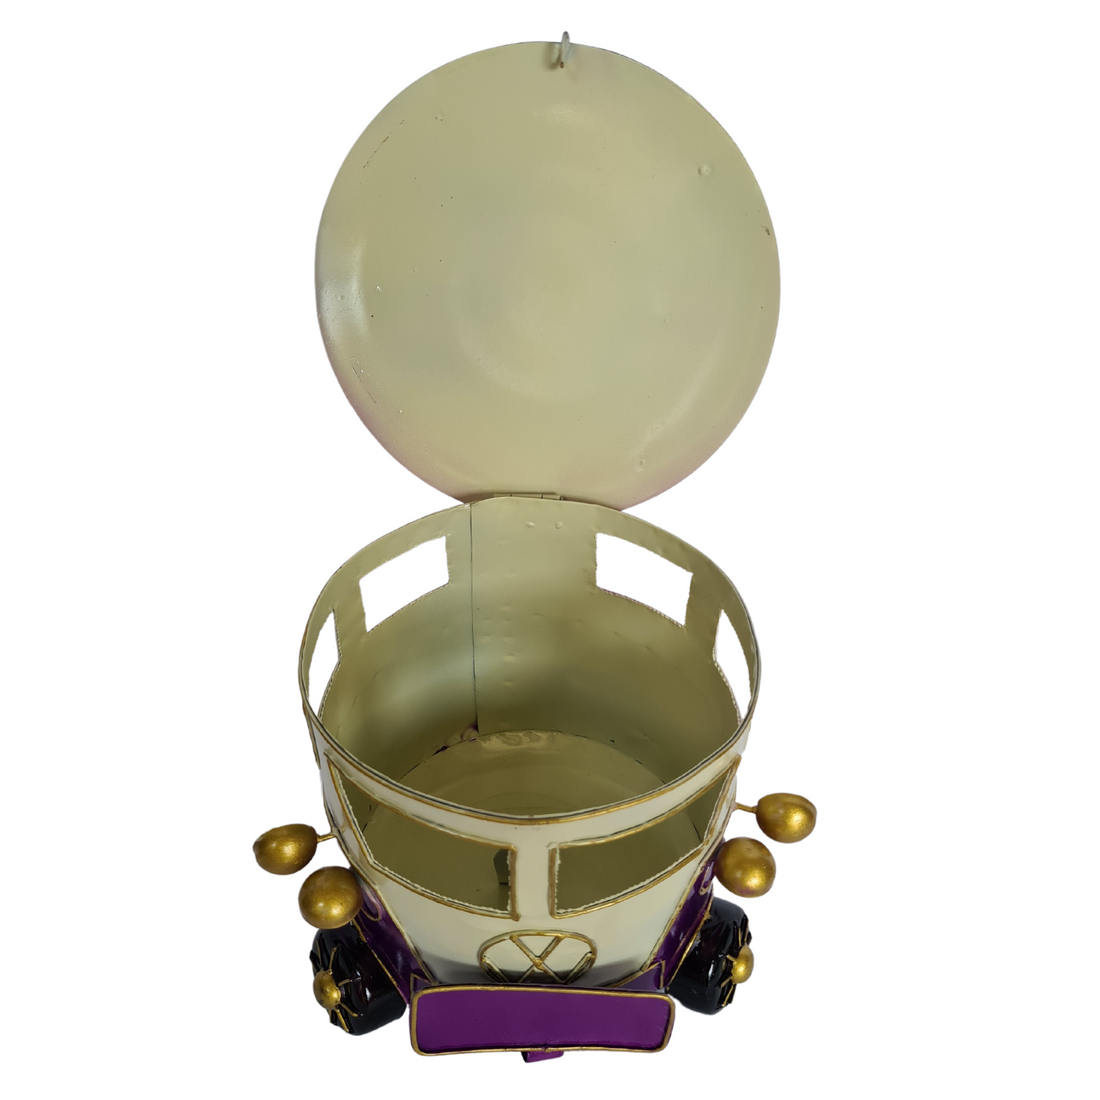 Mosquito coil holder as a funkie VW Combi in purple colour